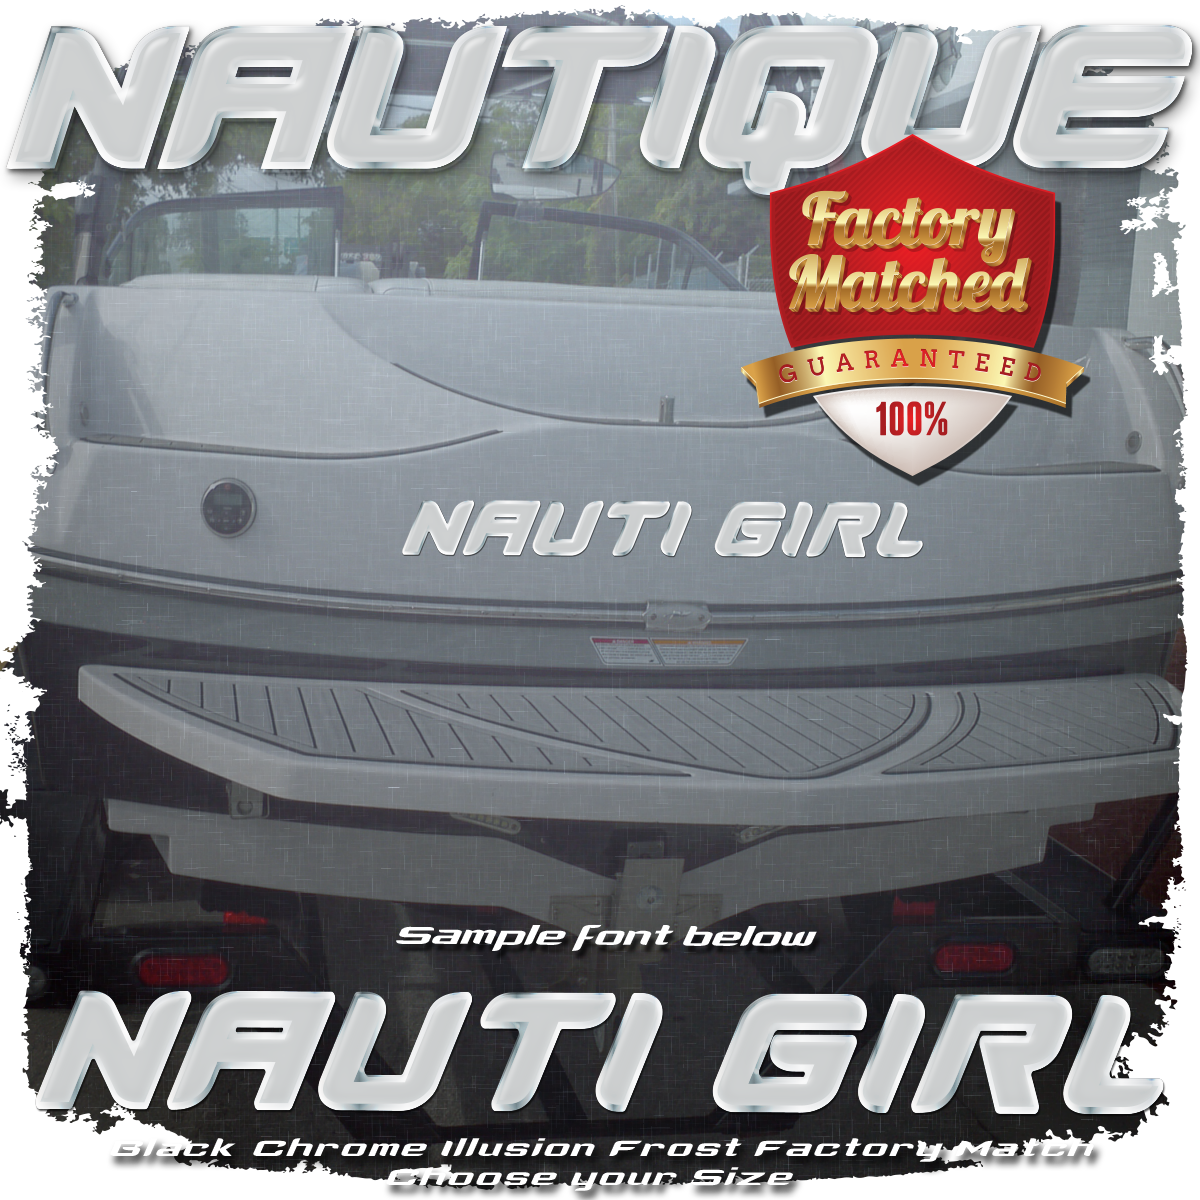 Domed Boat Name in the Nautique Font, Factory Matched Chrome Illusion Frost